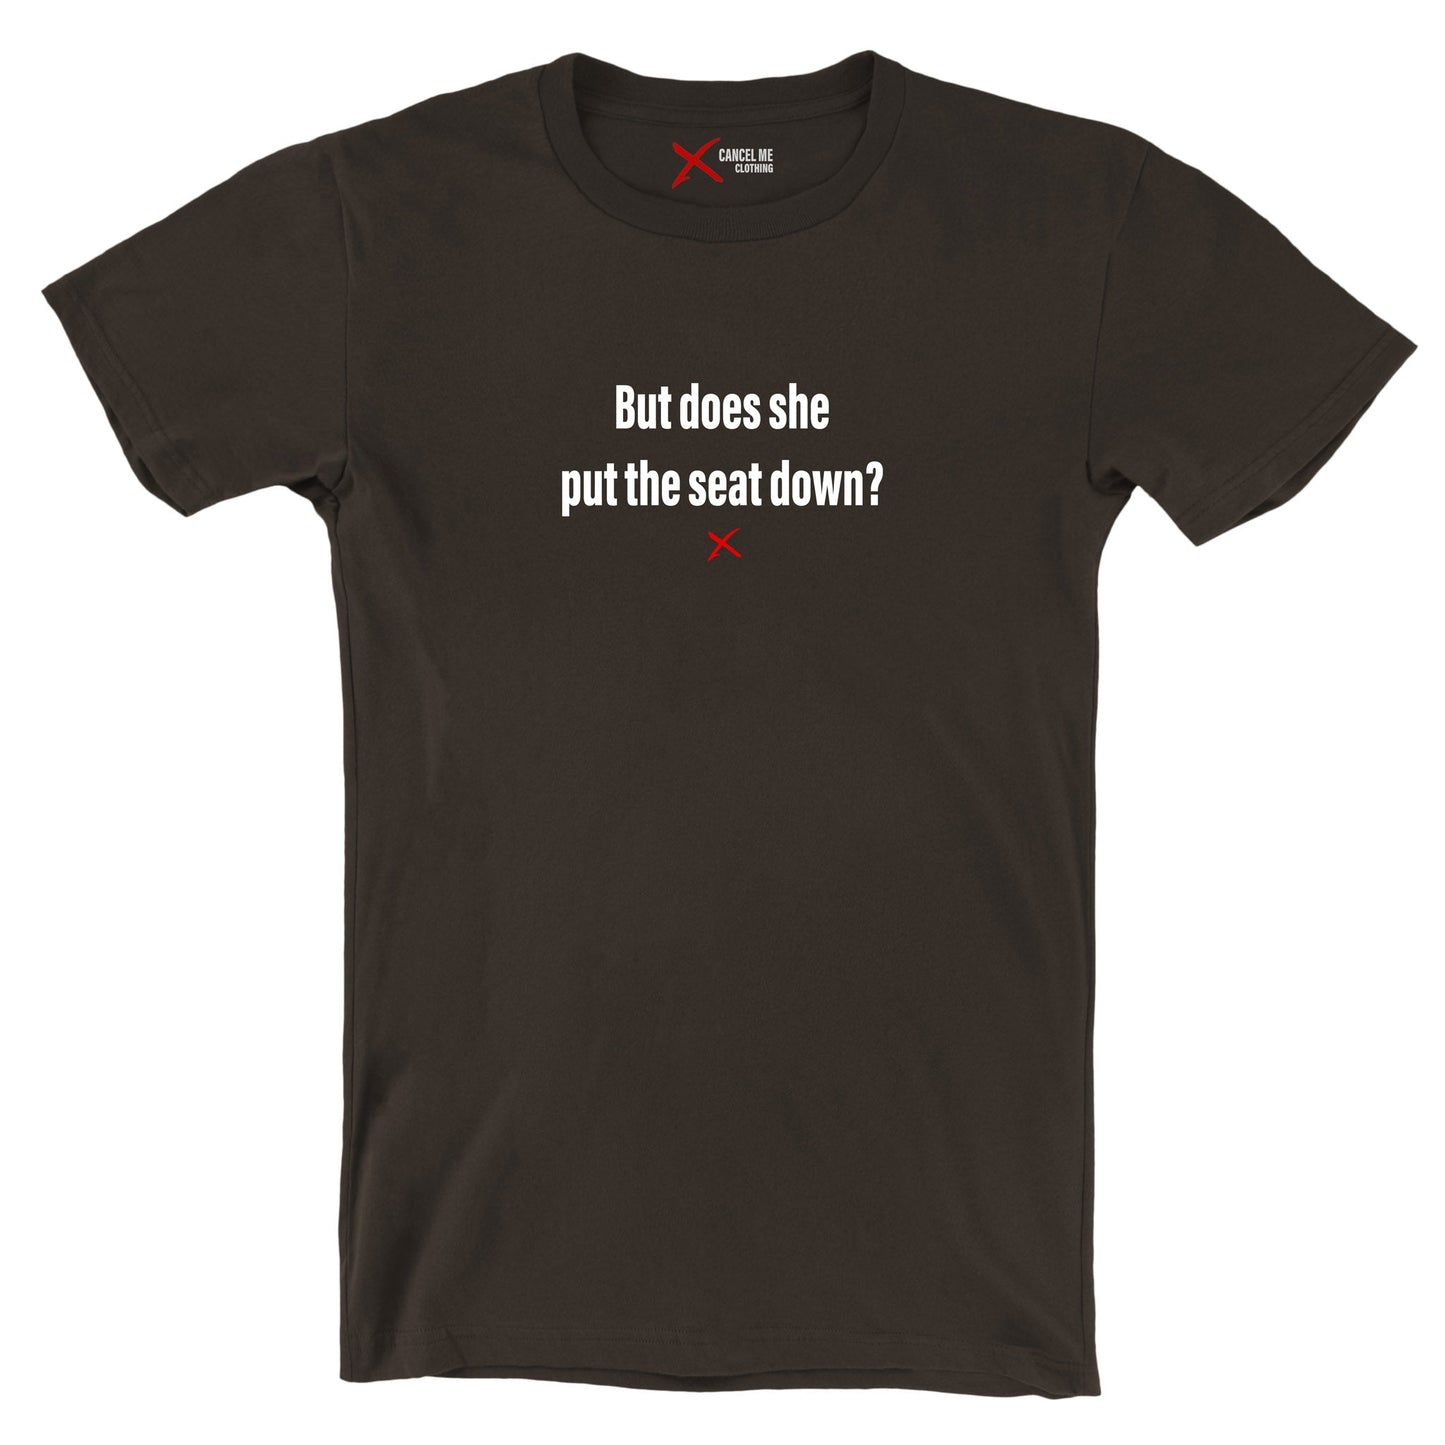 But does she put the seat down? - Shirt